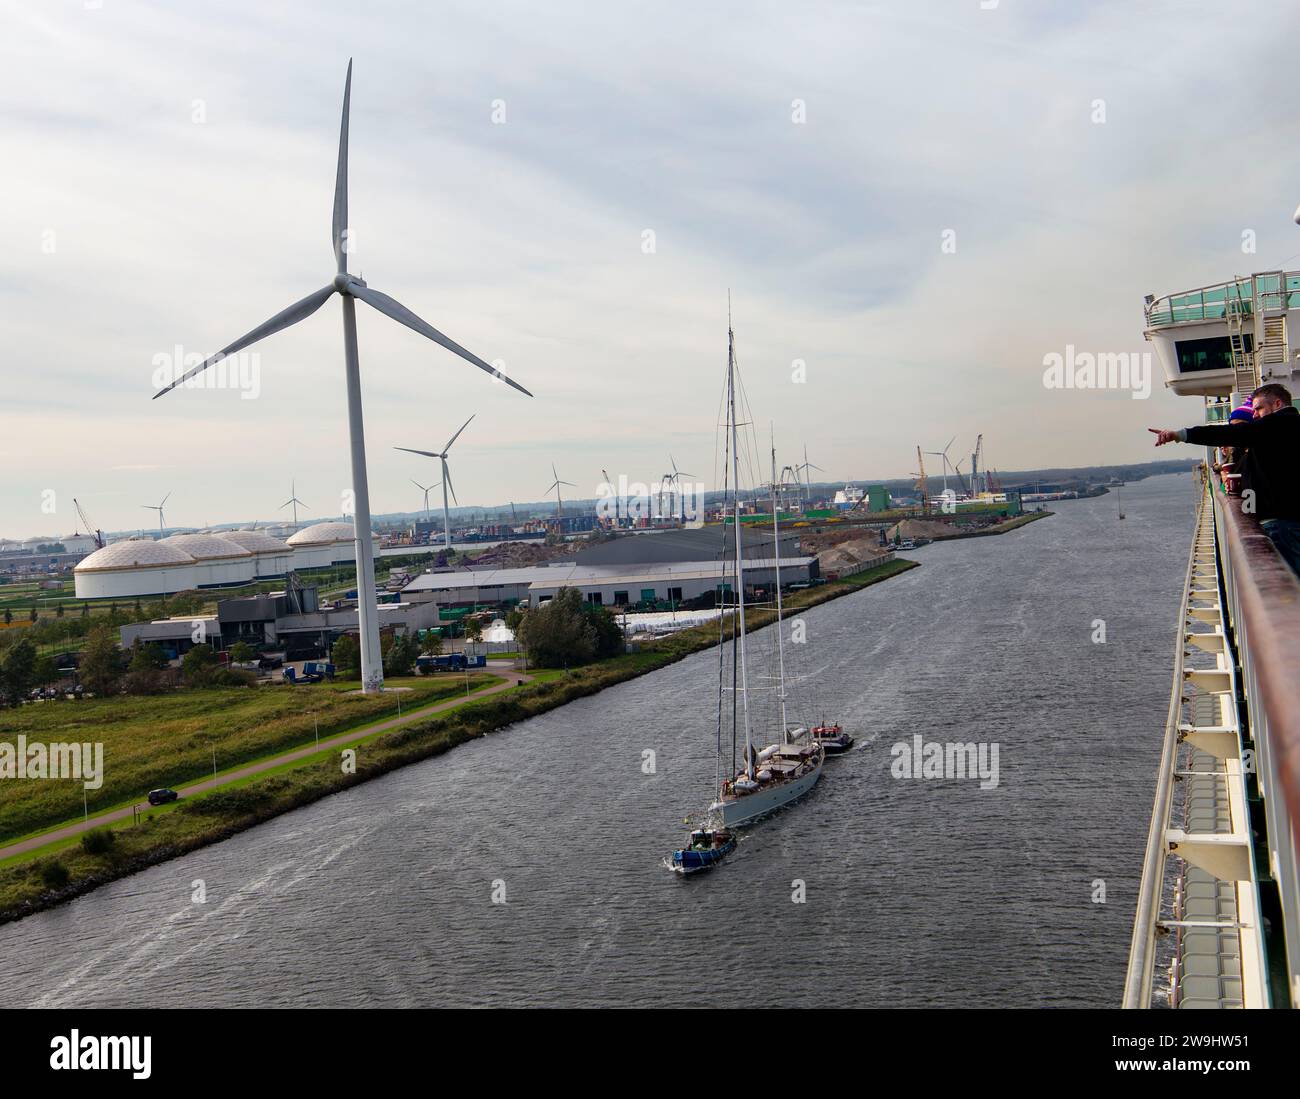 View from P&O cruise ship Ventura coming into Amsterdam with smaller sailing ship being towed by the side and electric wind turbines on shore. Stock Photo